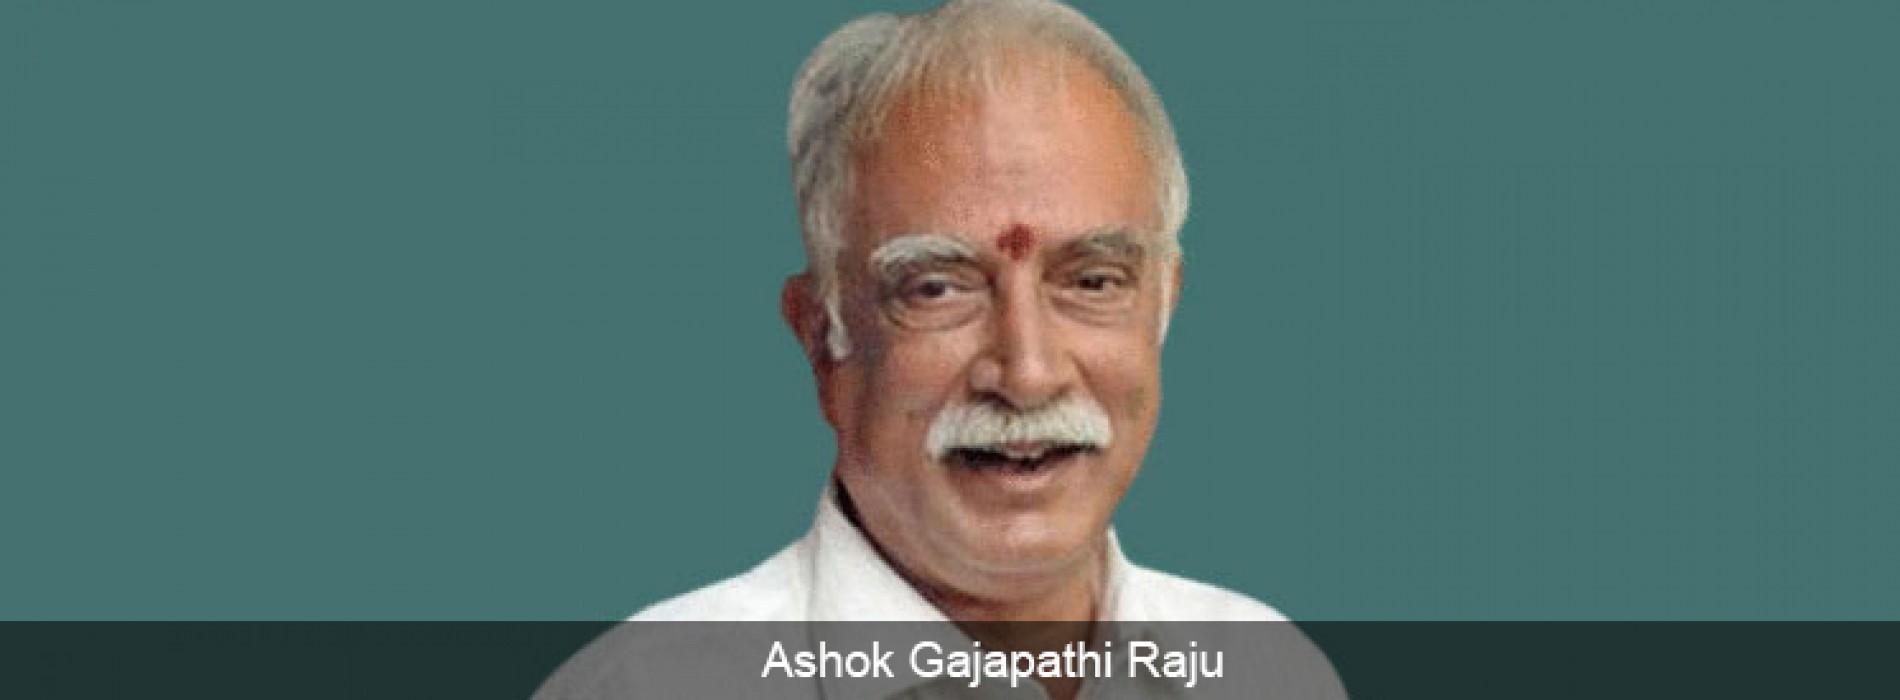 Ashok Gajapathi Raju invites France to invest in India’s Aviation Sector